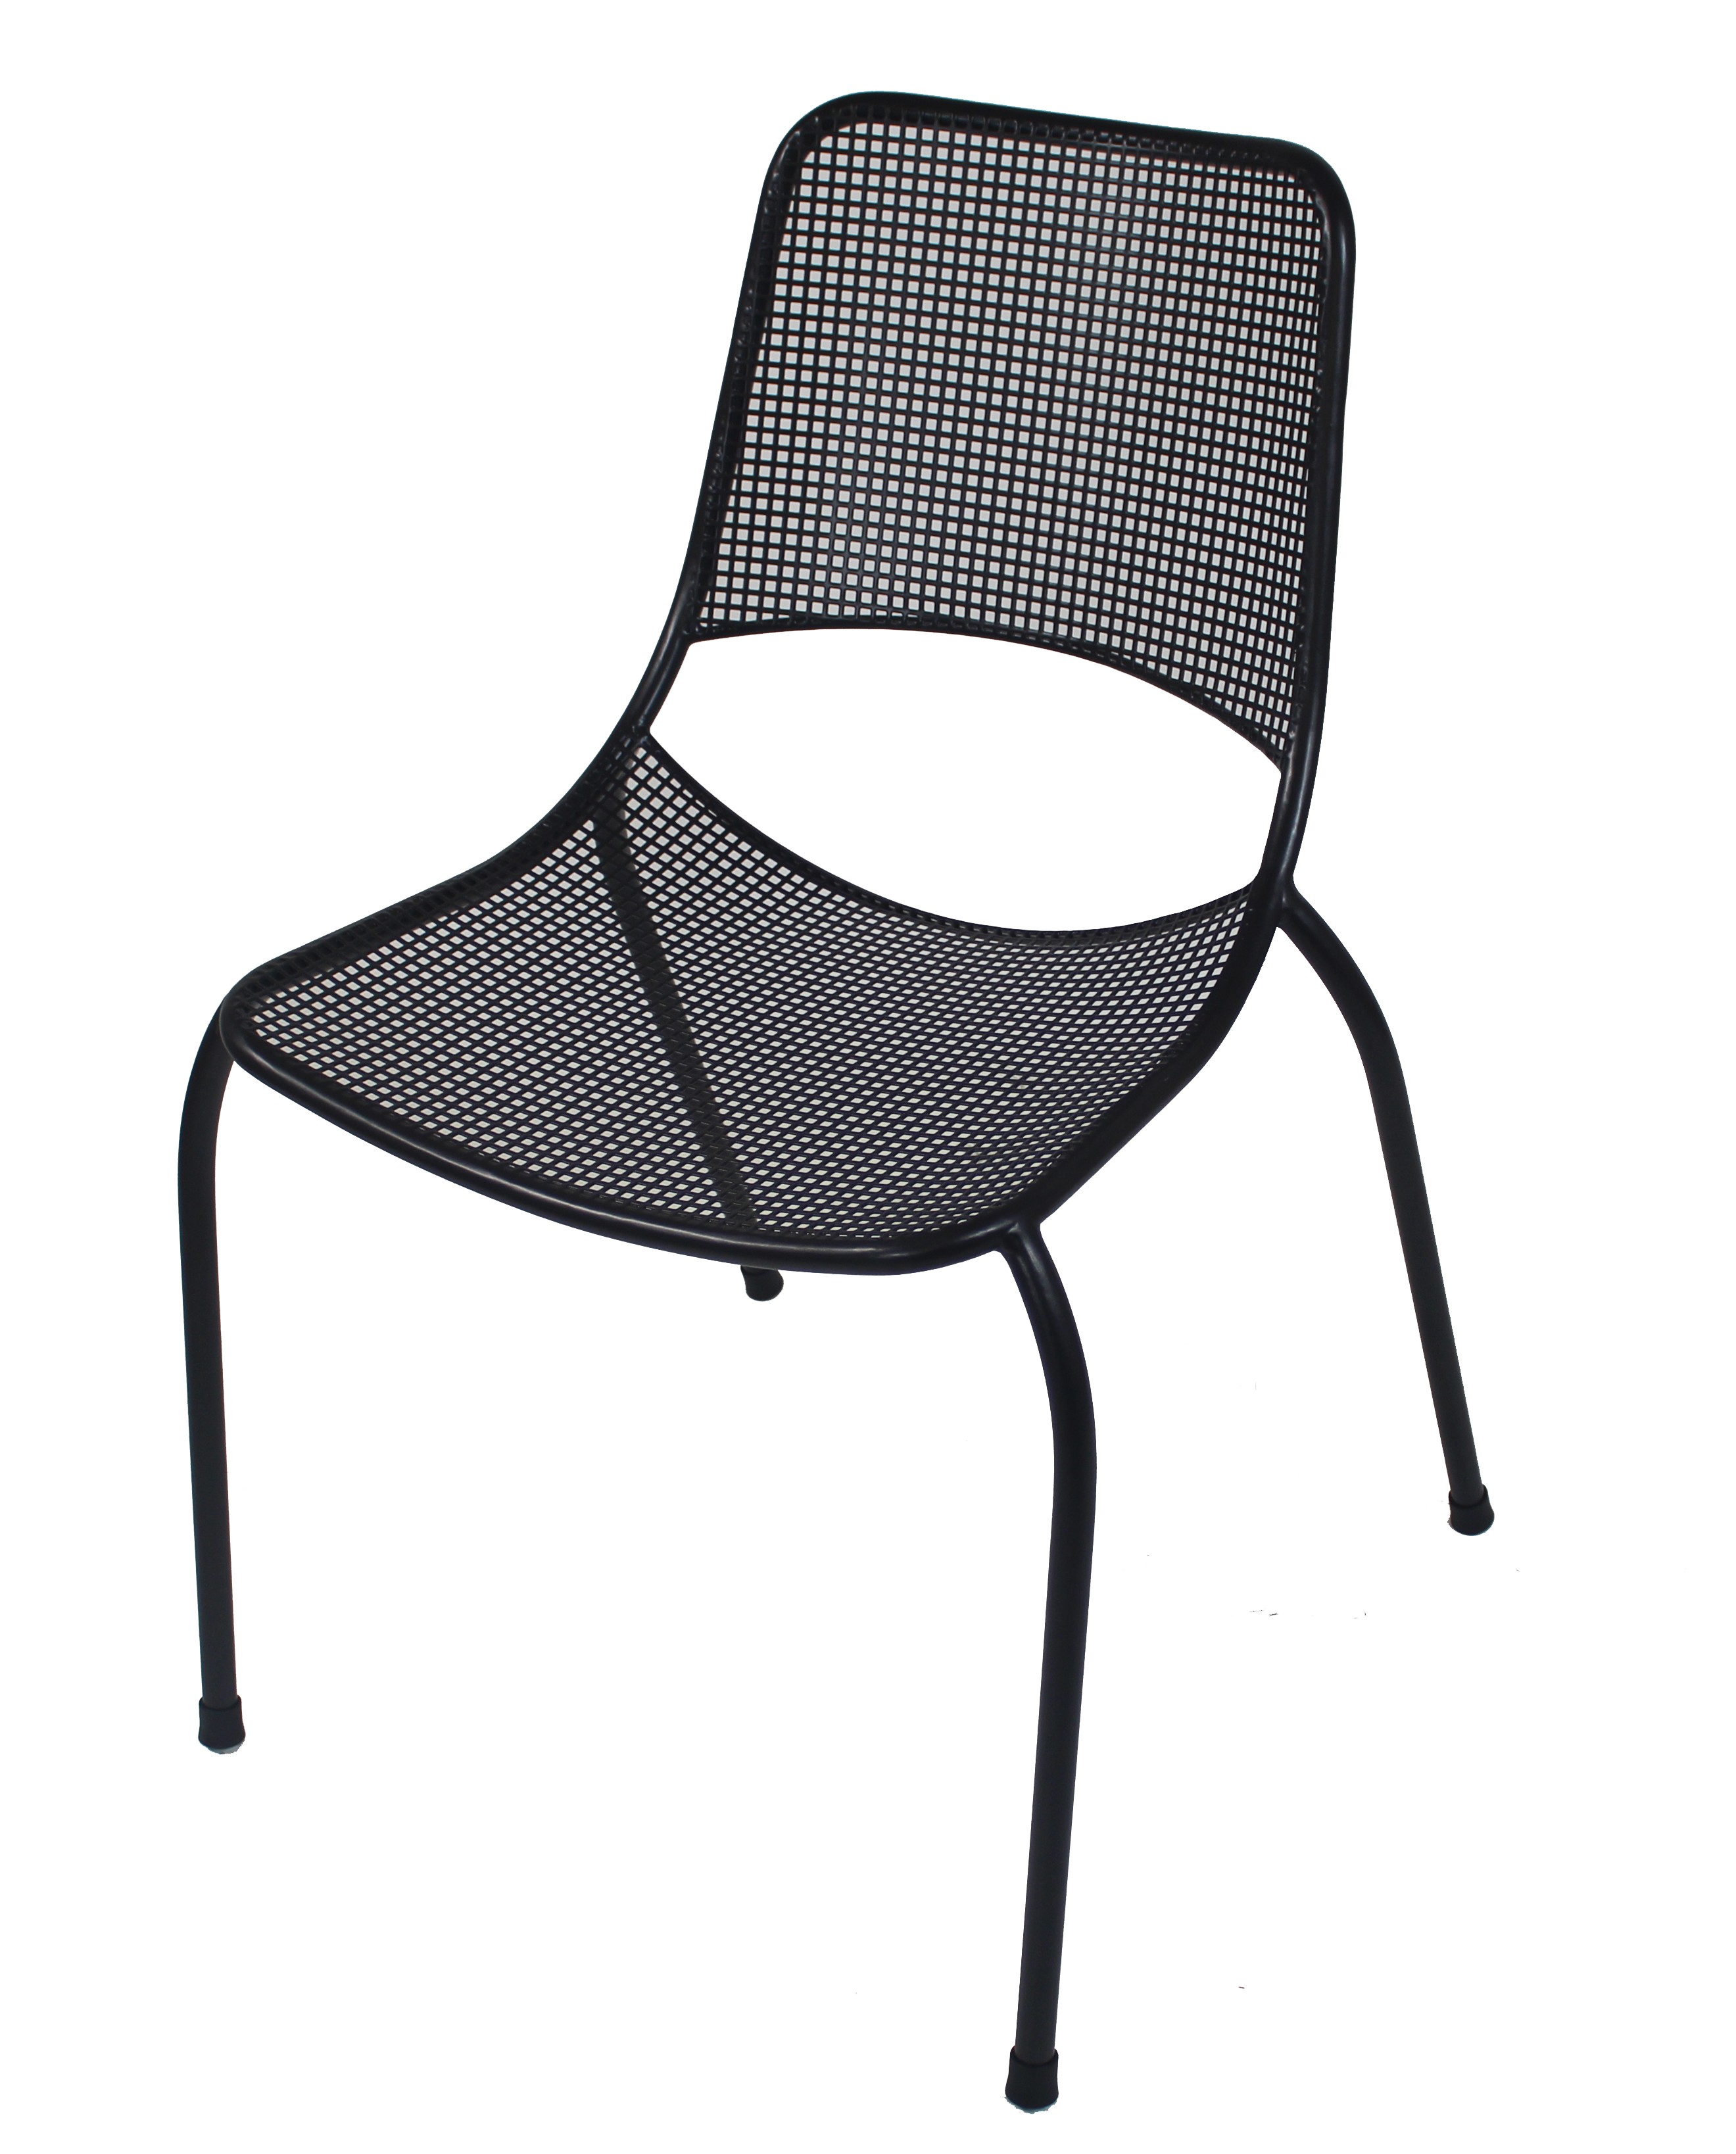 METRO SIDE CHAIR
D7509-0200
